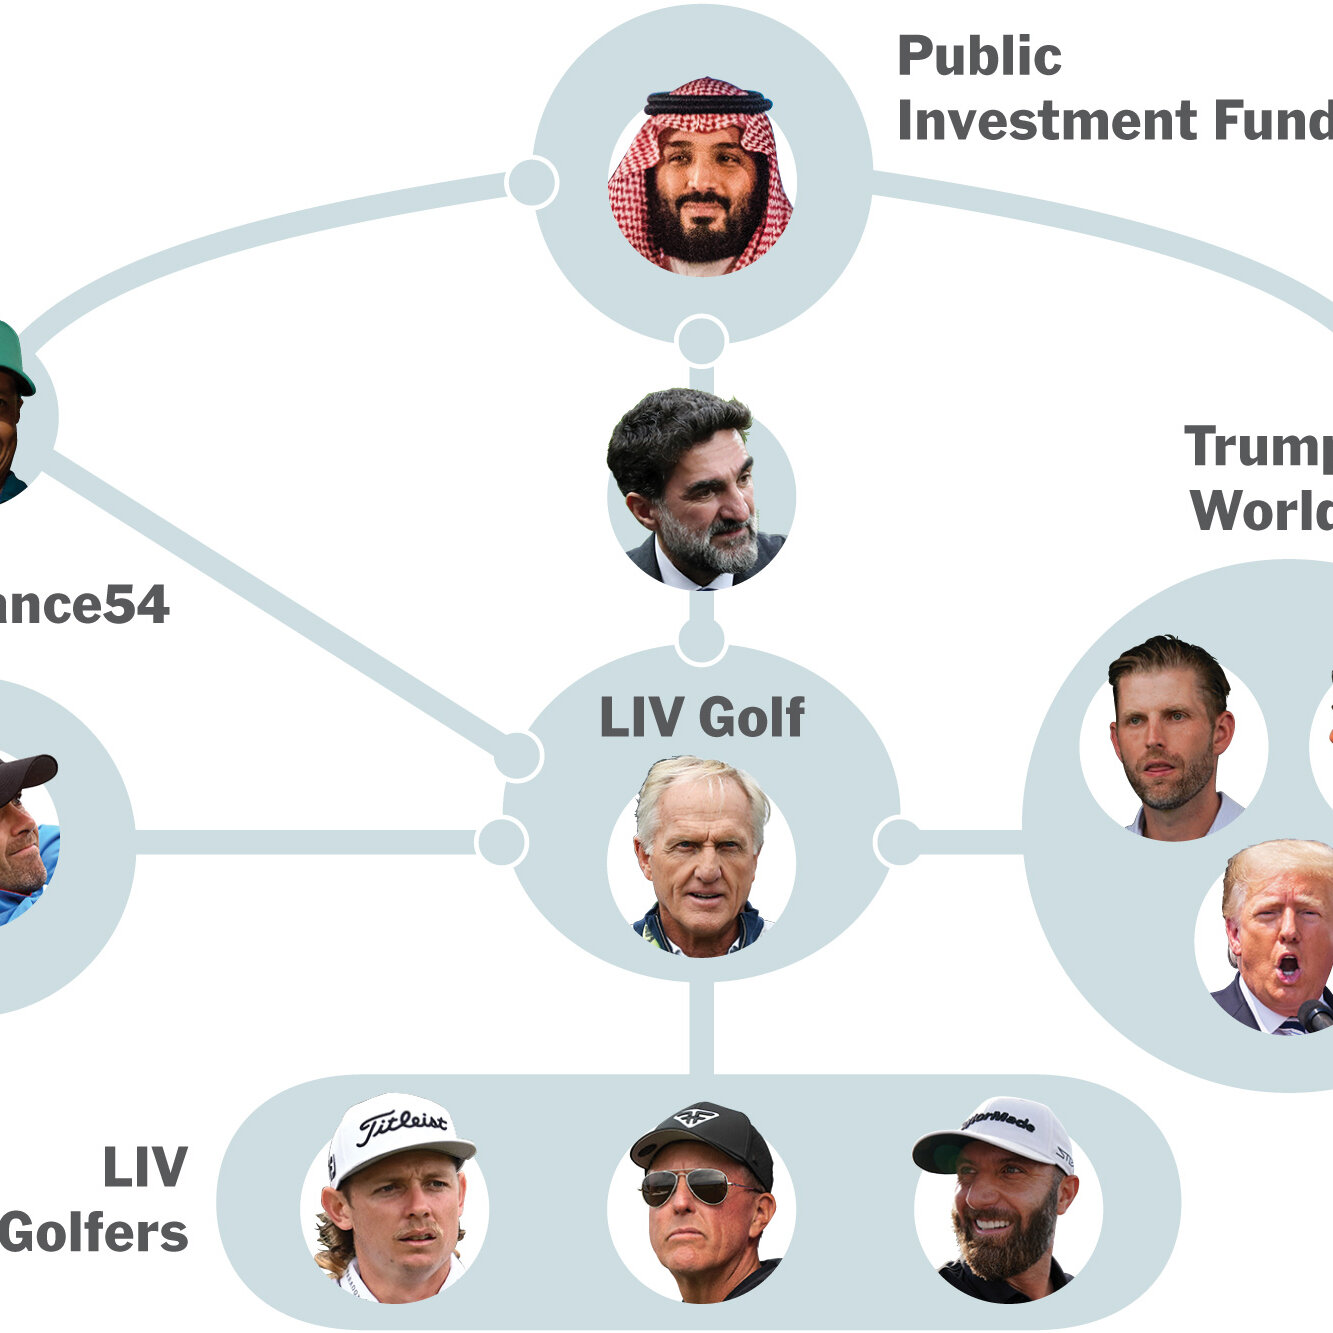 who-owns-liv-golf-investments